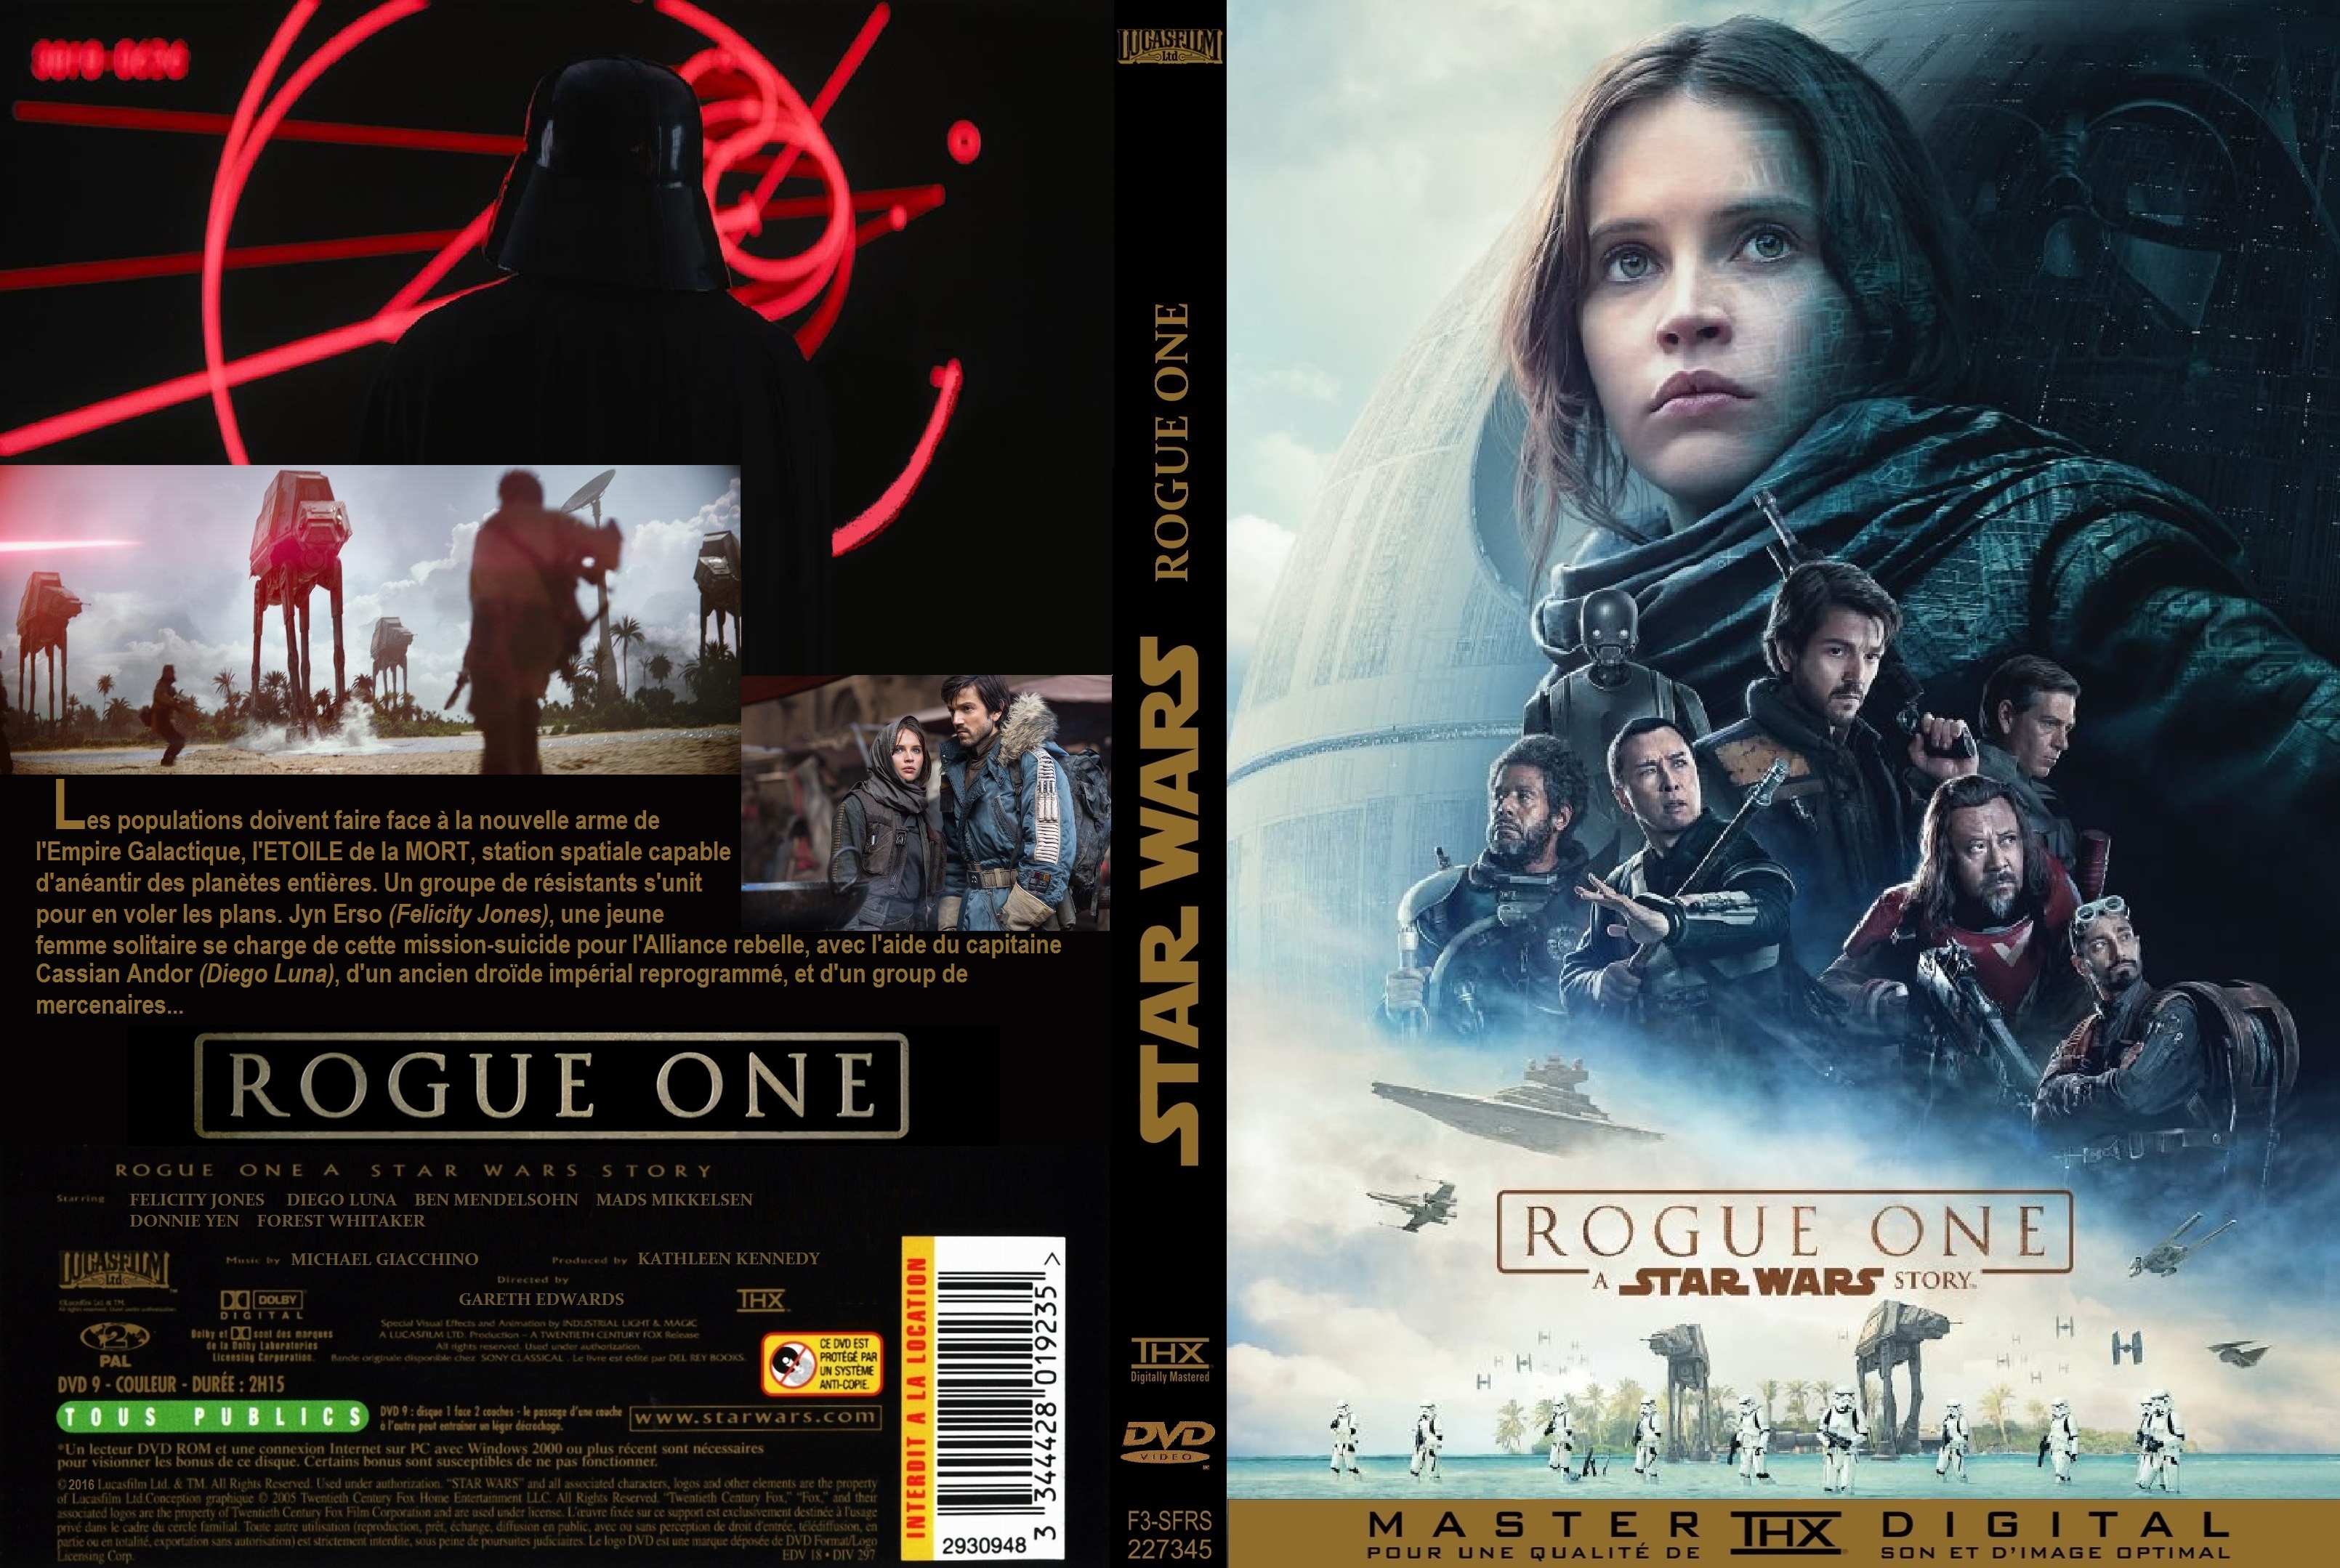 Jaquette DVD Rogue One: A Star Wars Story custom